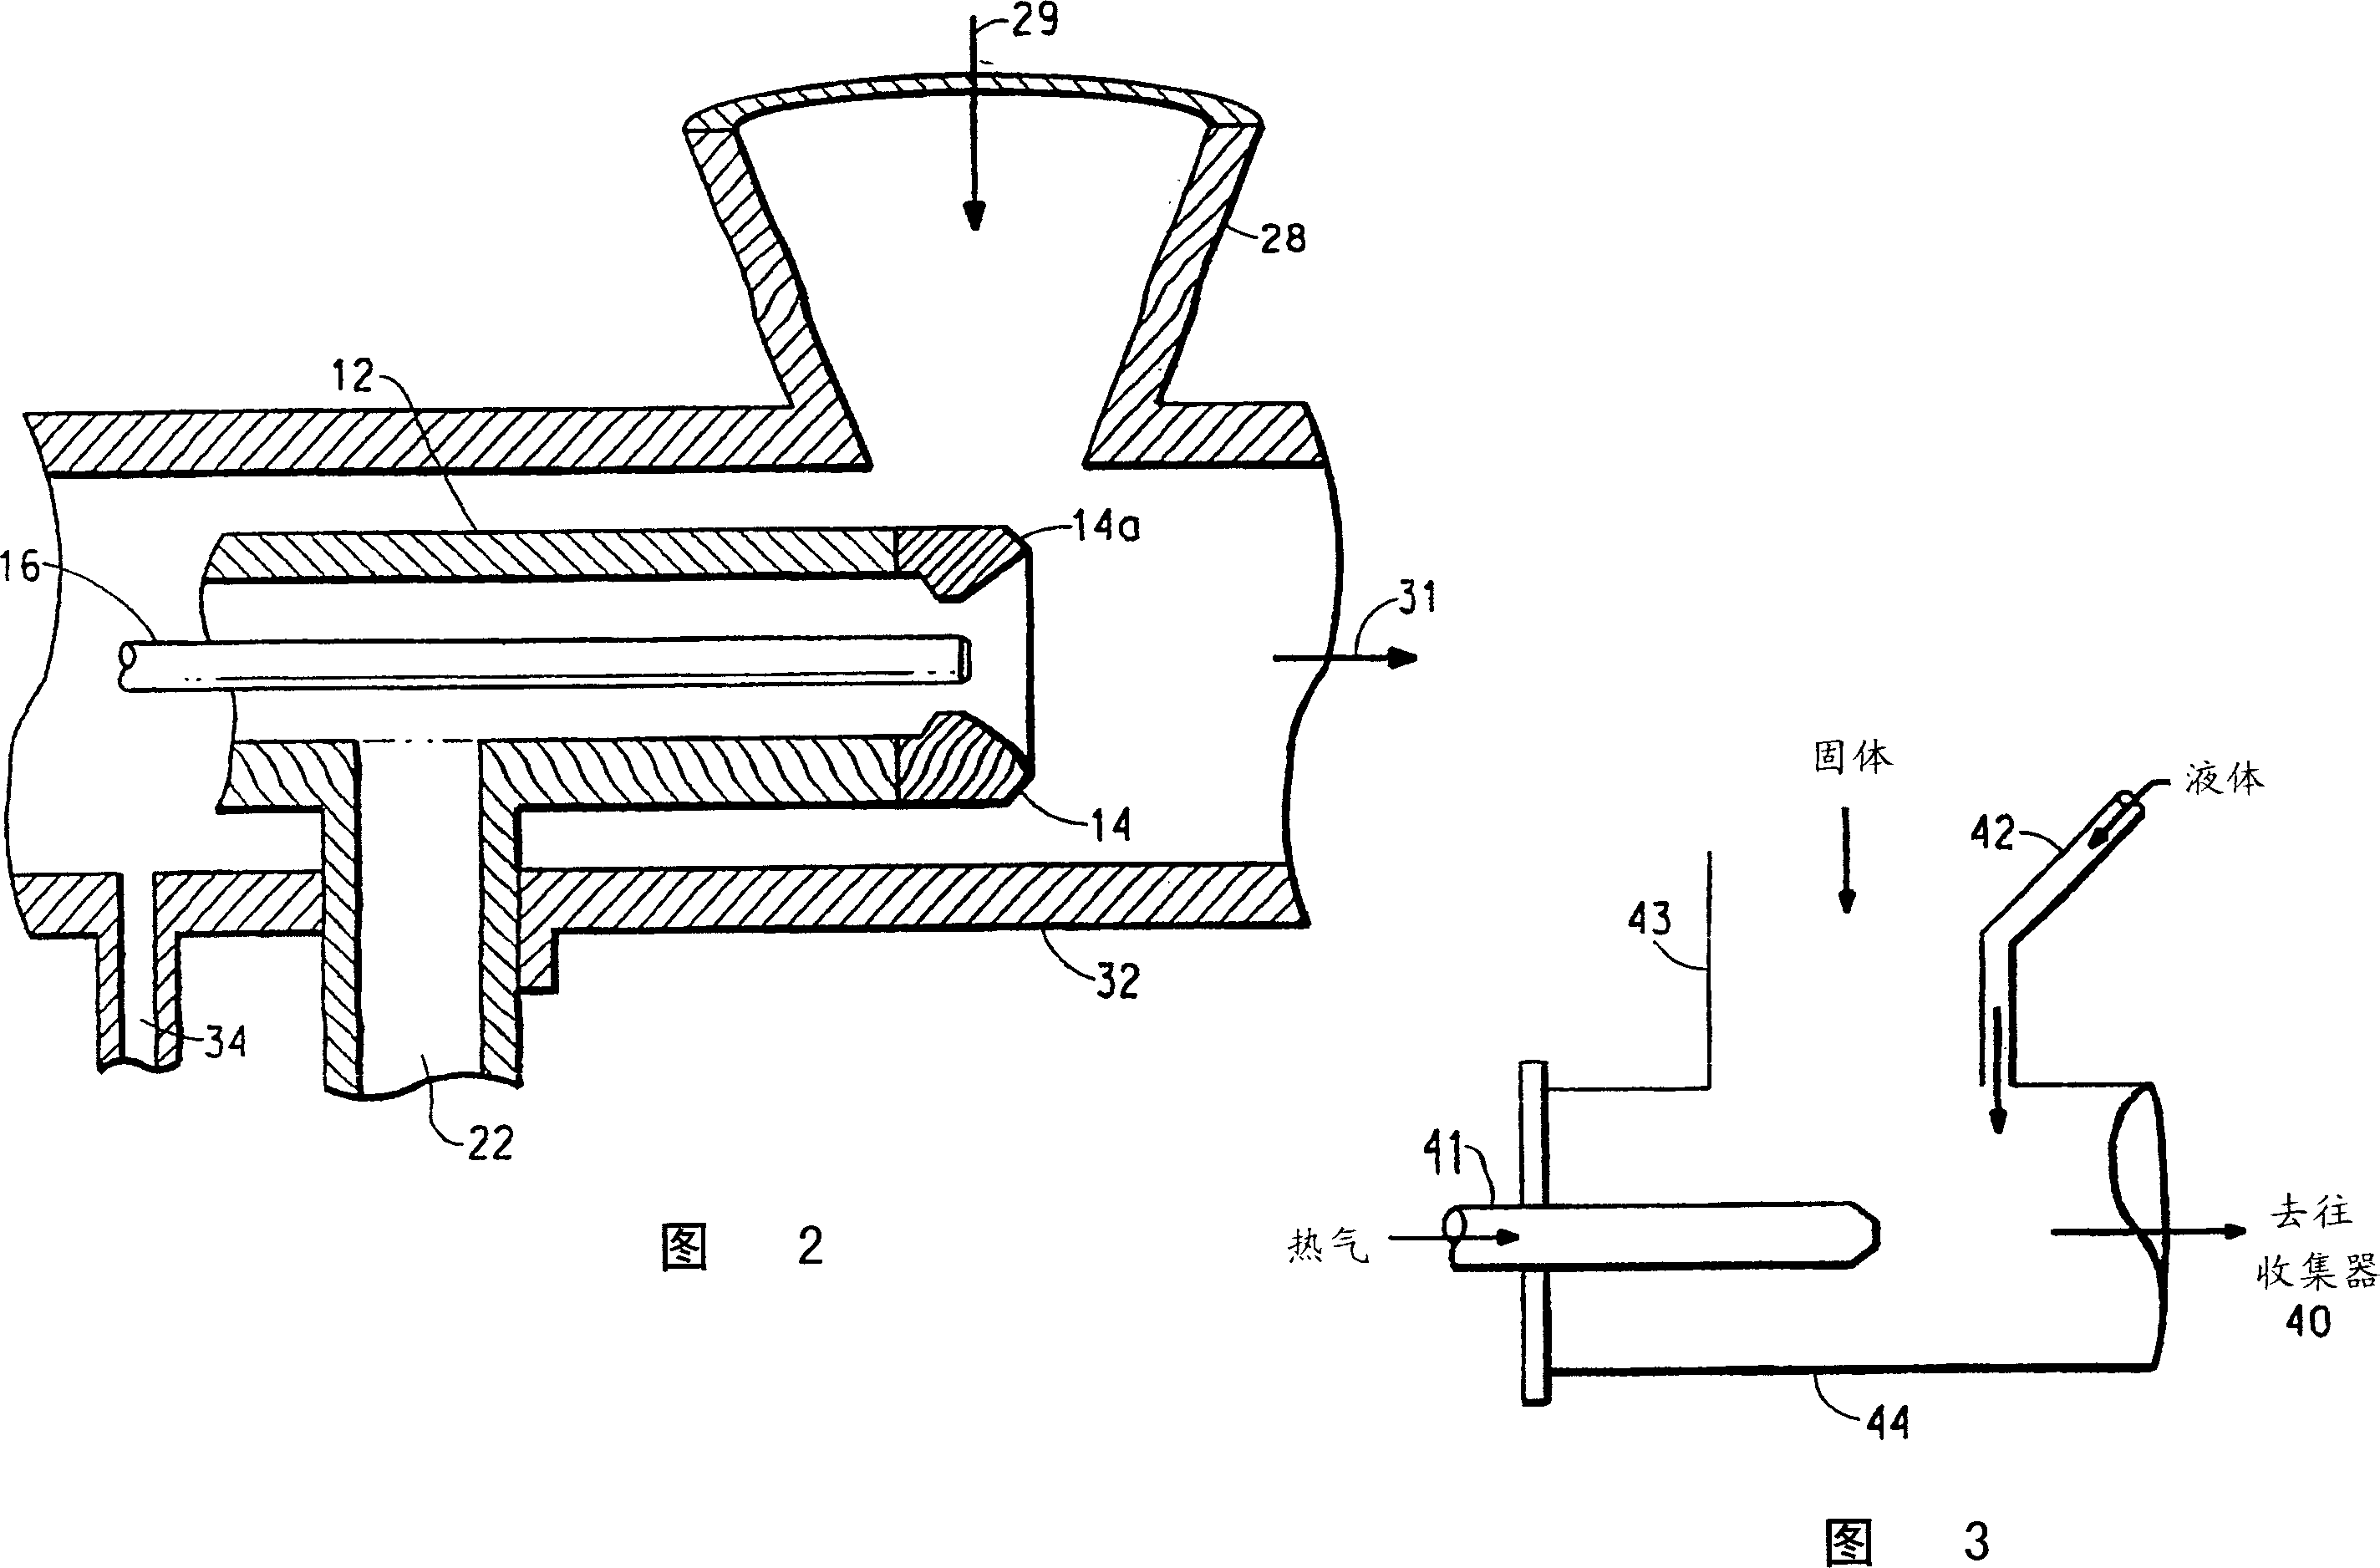 Process for coating a pharmaceutical particle